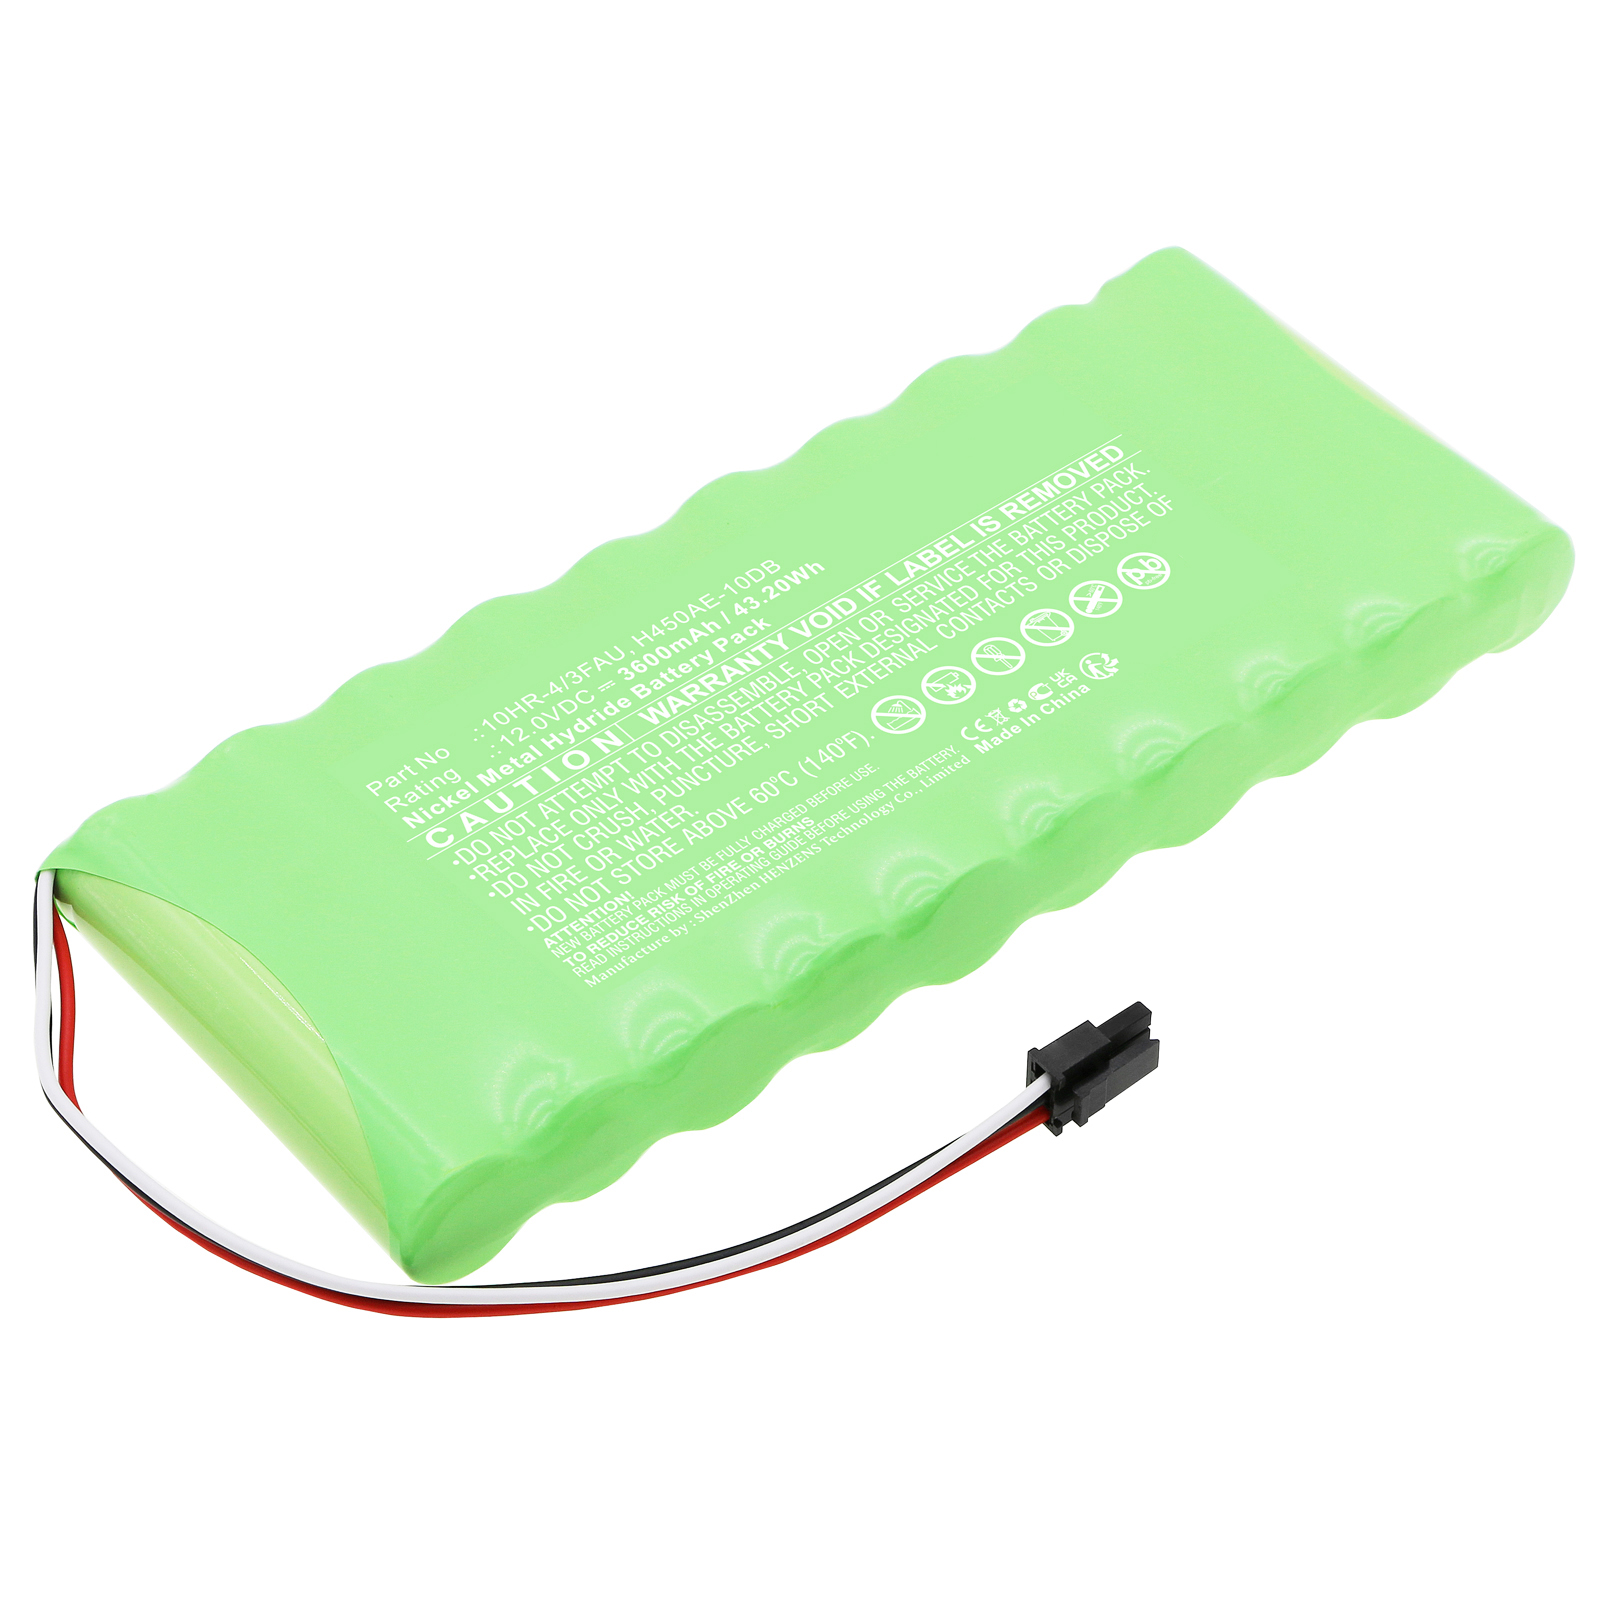 Synergy Digital Equipment Battery, Compatible with Diebold 29-014509-000A-1 Equipment Battery (Ni-MH, 12V, 3600mAh)